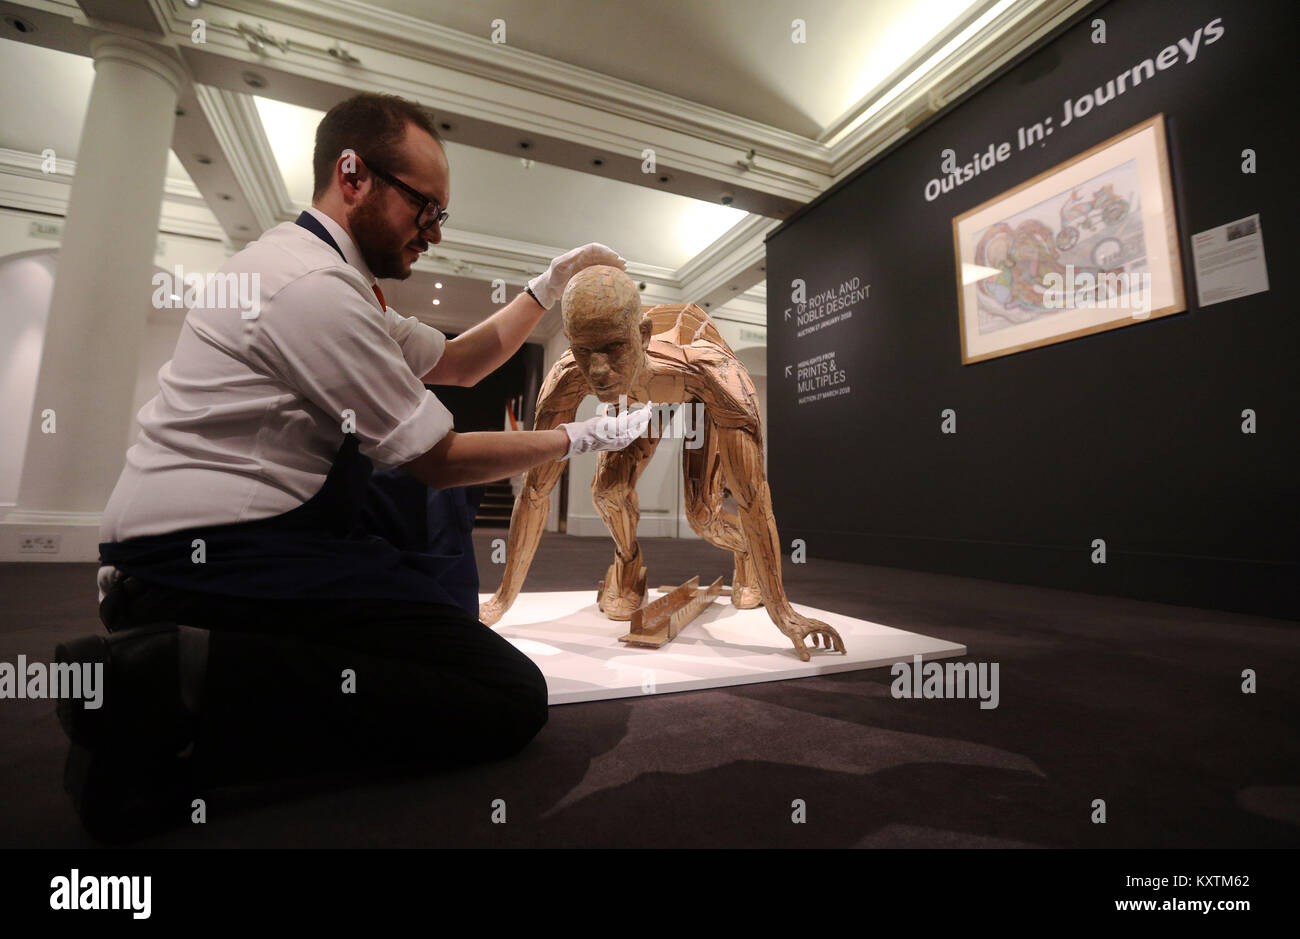 A gallery technician adjusts a work by James Lake titled Running Figure during a photo call for Sotheby's Outsider Art exhibition celebrating the work of the Outside In charity at Sotheby's in London. Stock Photo